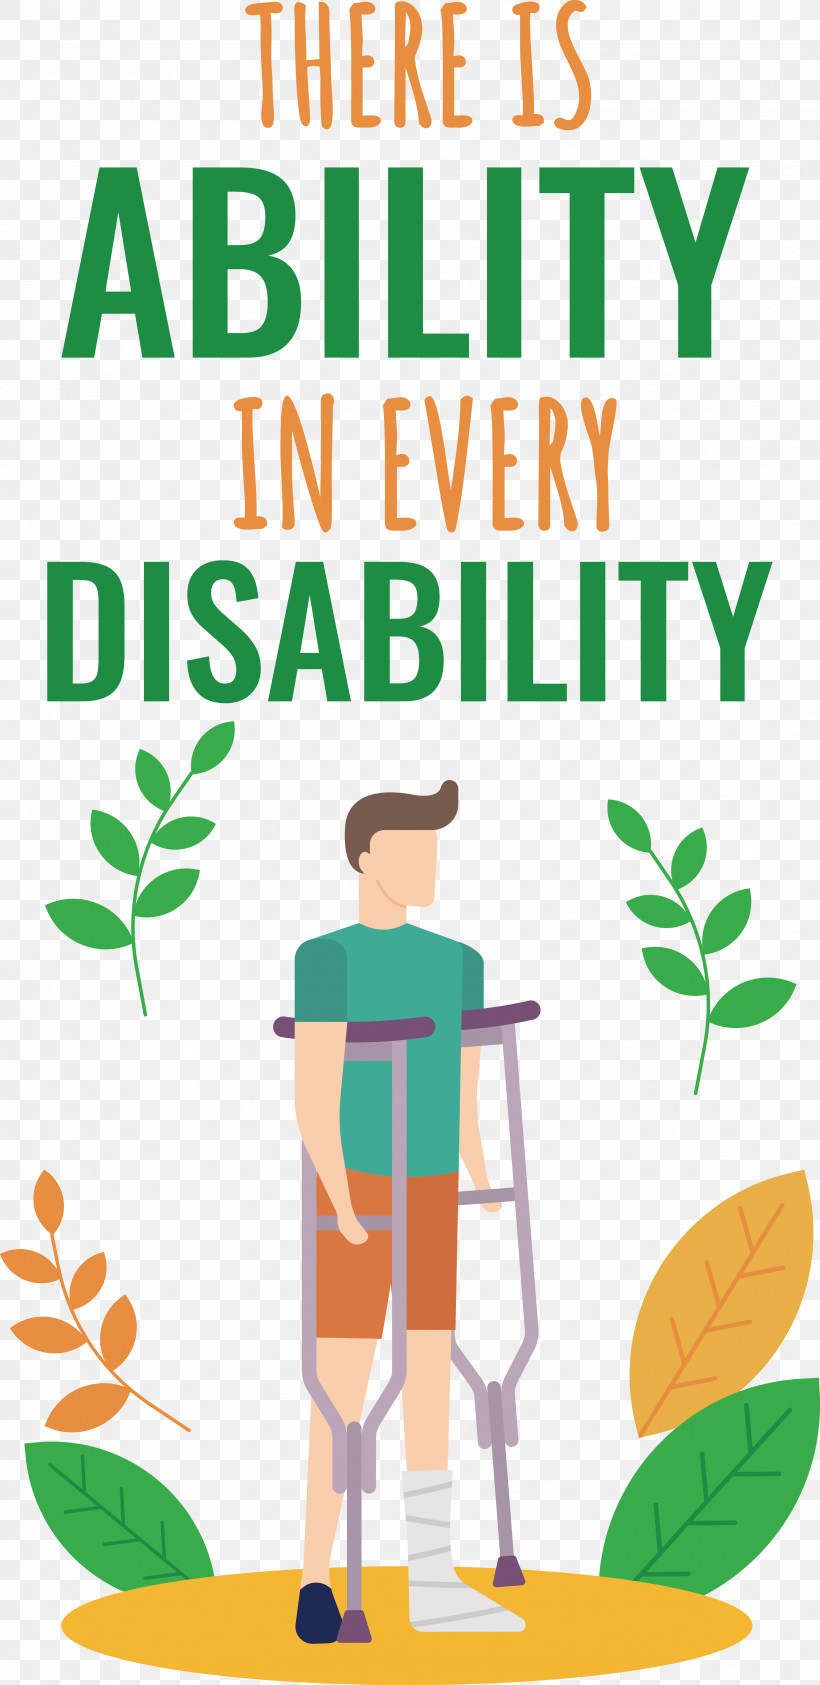 International Disability Day Never Give Up International Day Disabled Persons, PNG, 3453x7099px, International Disability Day, Disabled Persons, International Day, Never Give Up Download Free